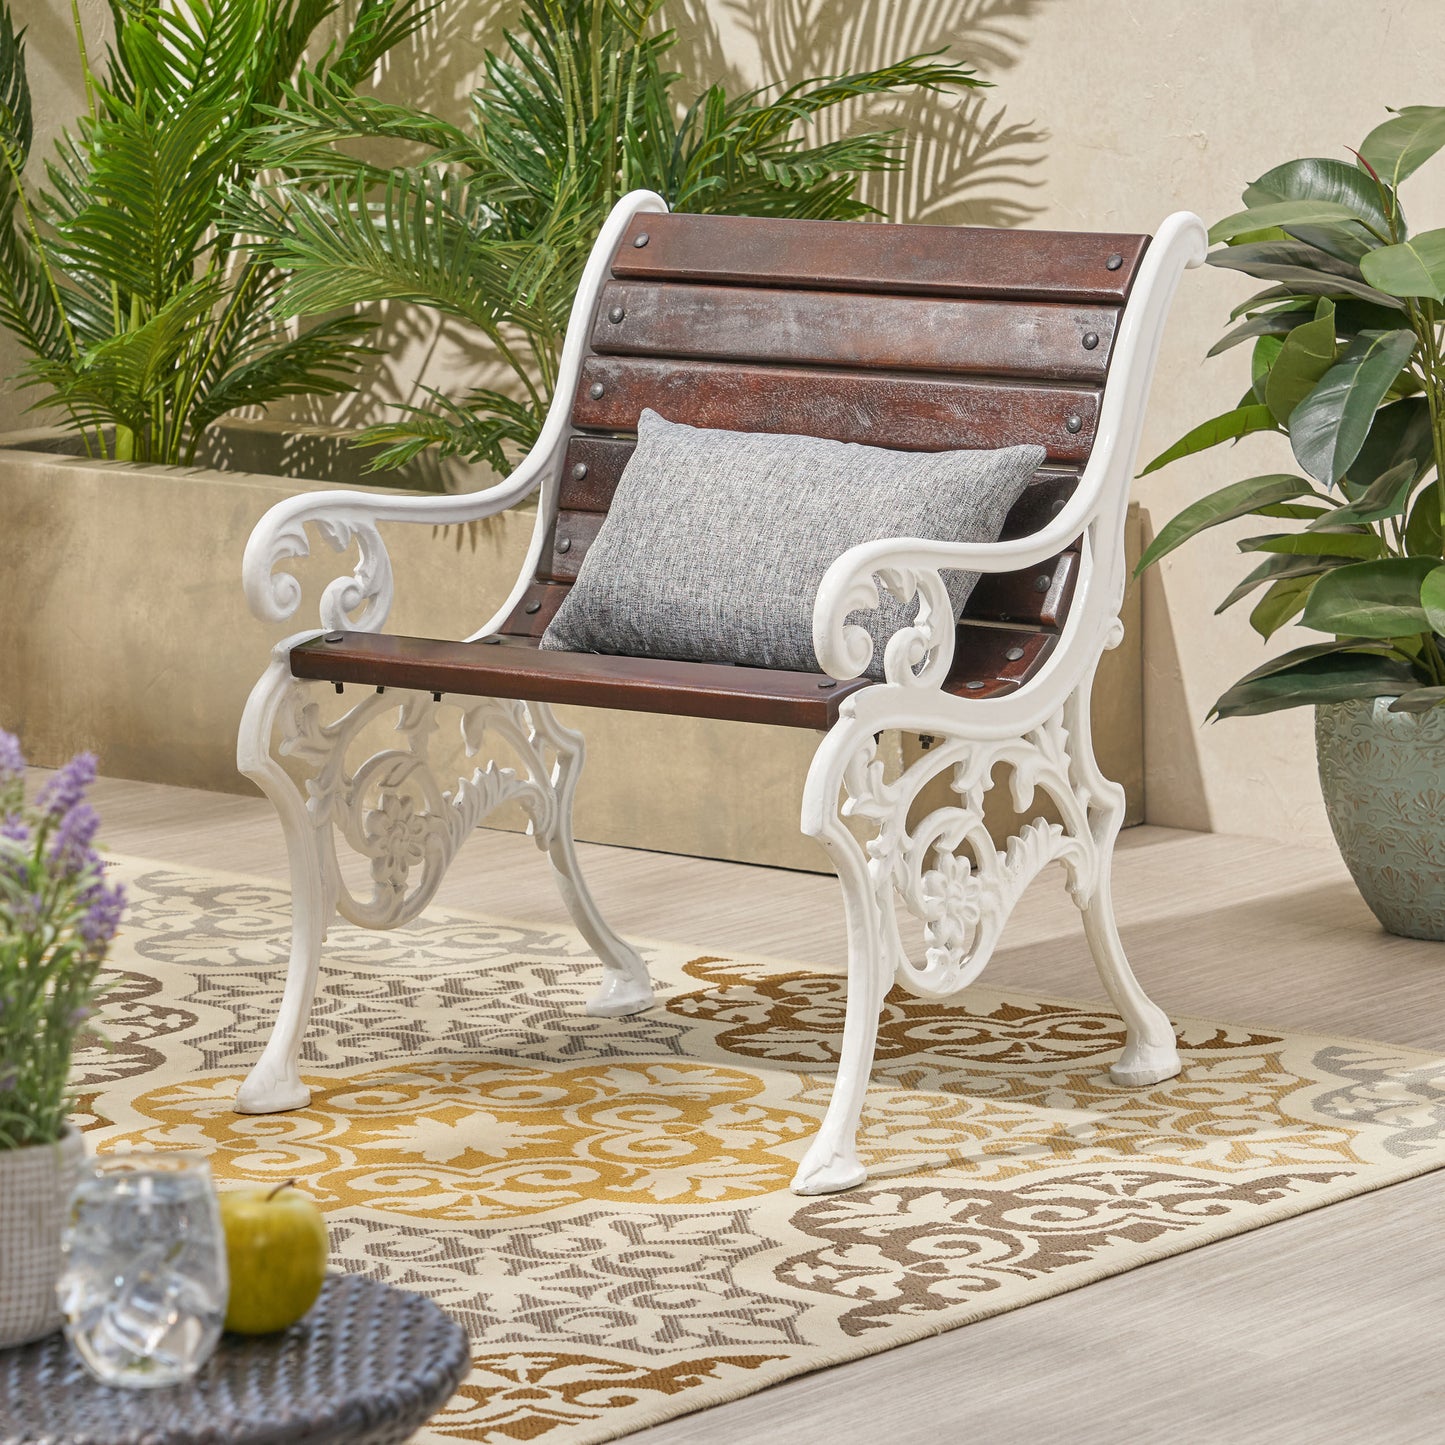 Taber Outdoor Handcrafted Mango Wood Chair, Rustic Brown and White